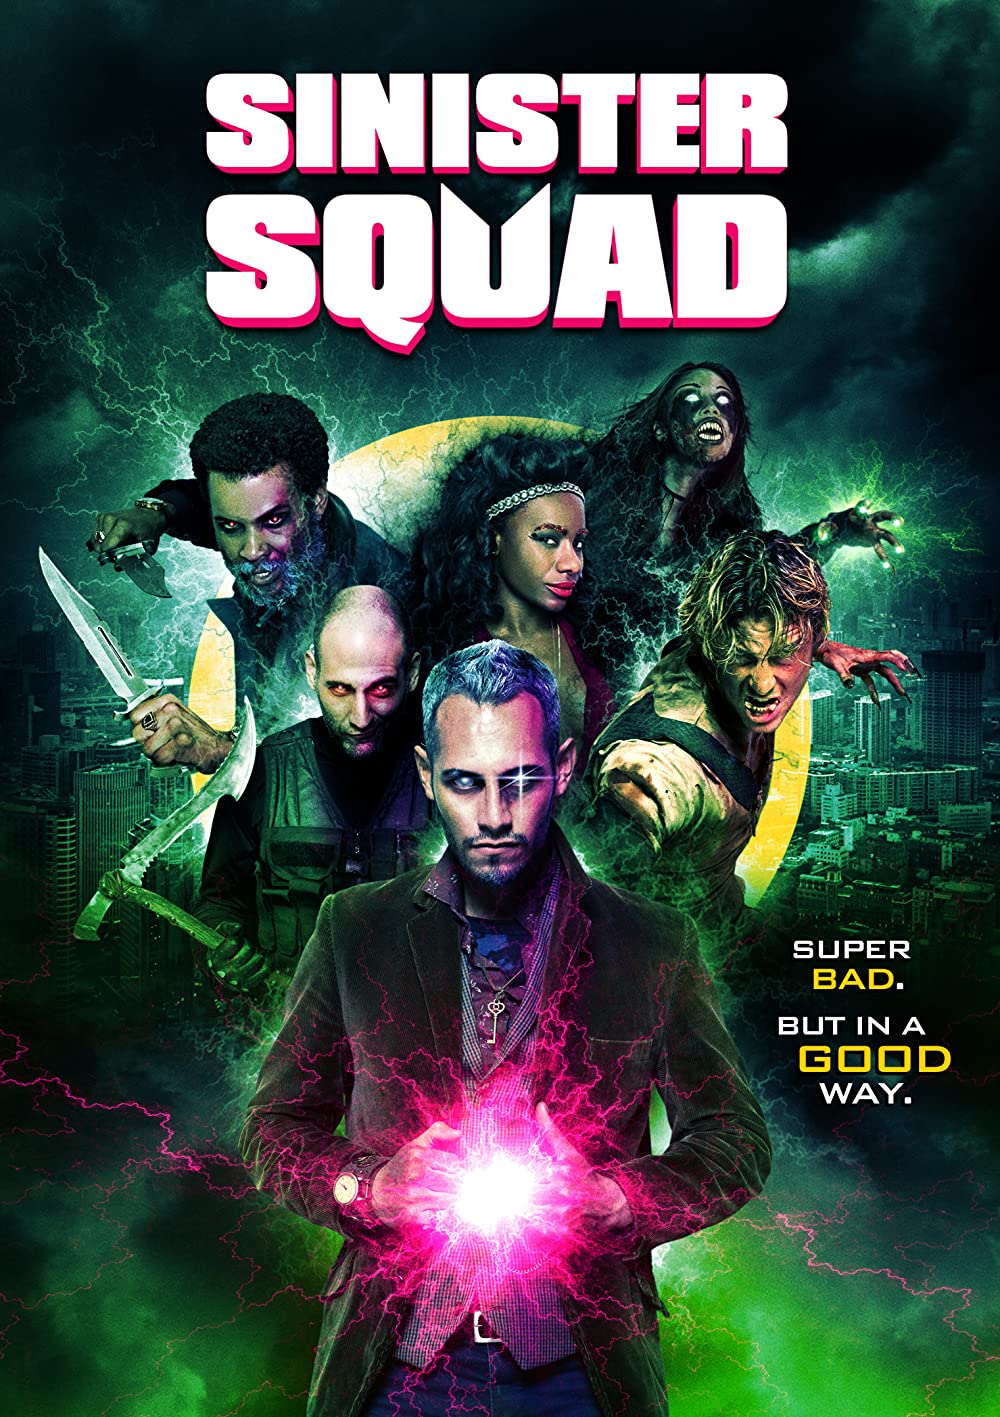 Download Sinister Squad (2016) UNRATED Dual Audio {Hindi ORG-English} BluRay 1080p [1.4GB] | 720p [750MB] | 480p [300MB] download